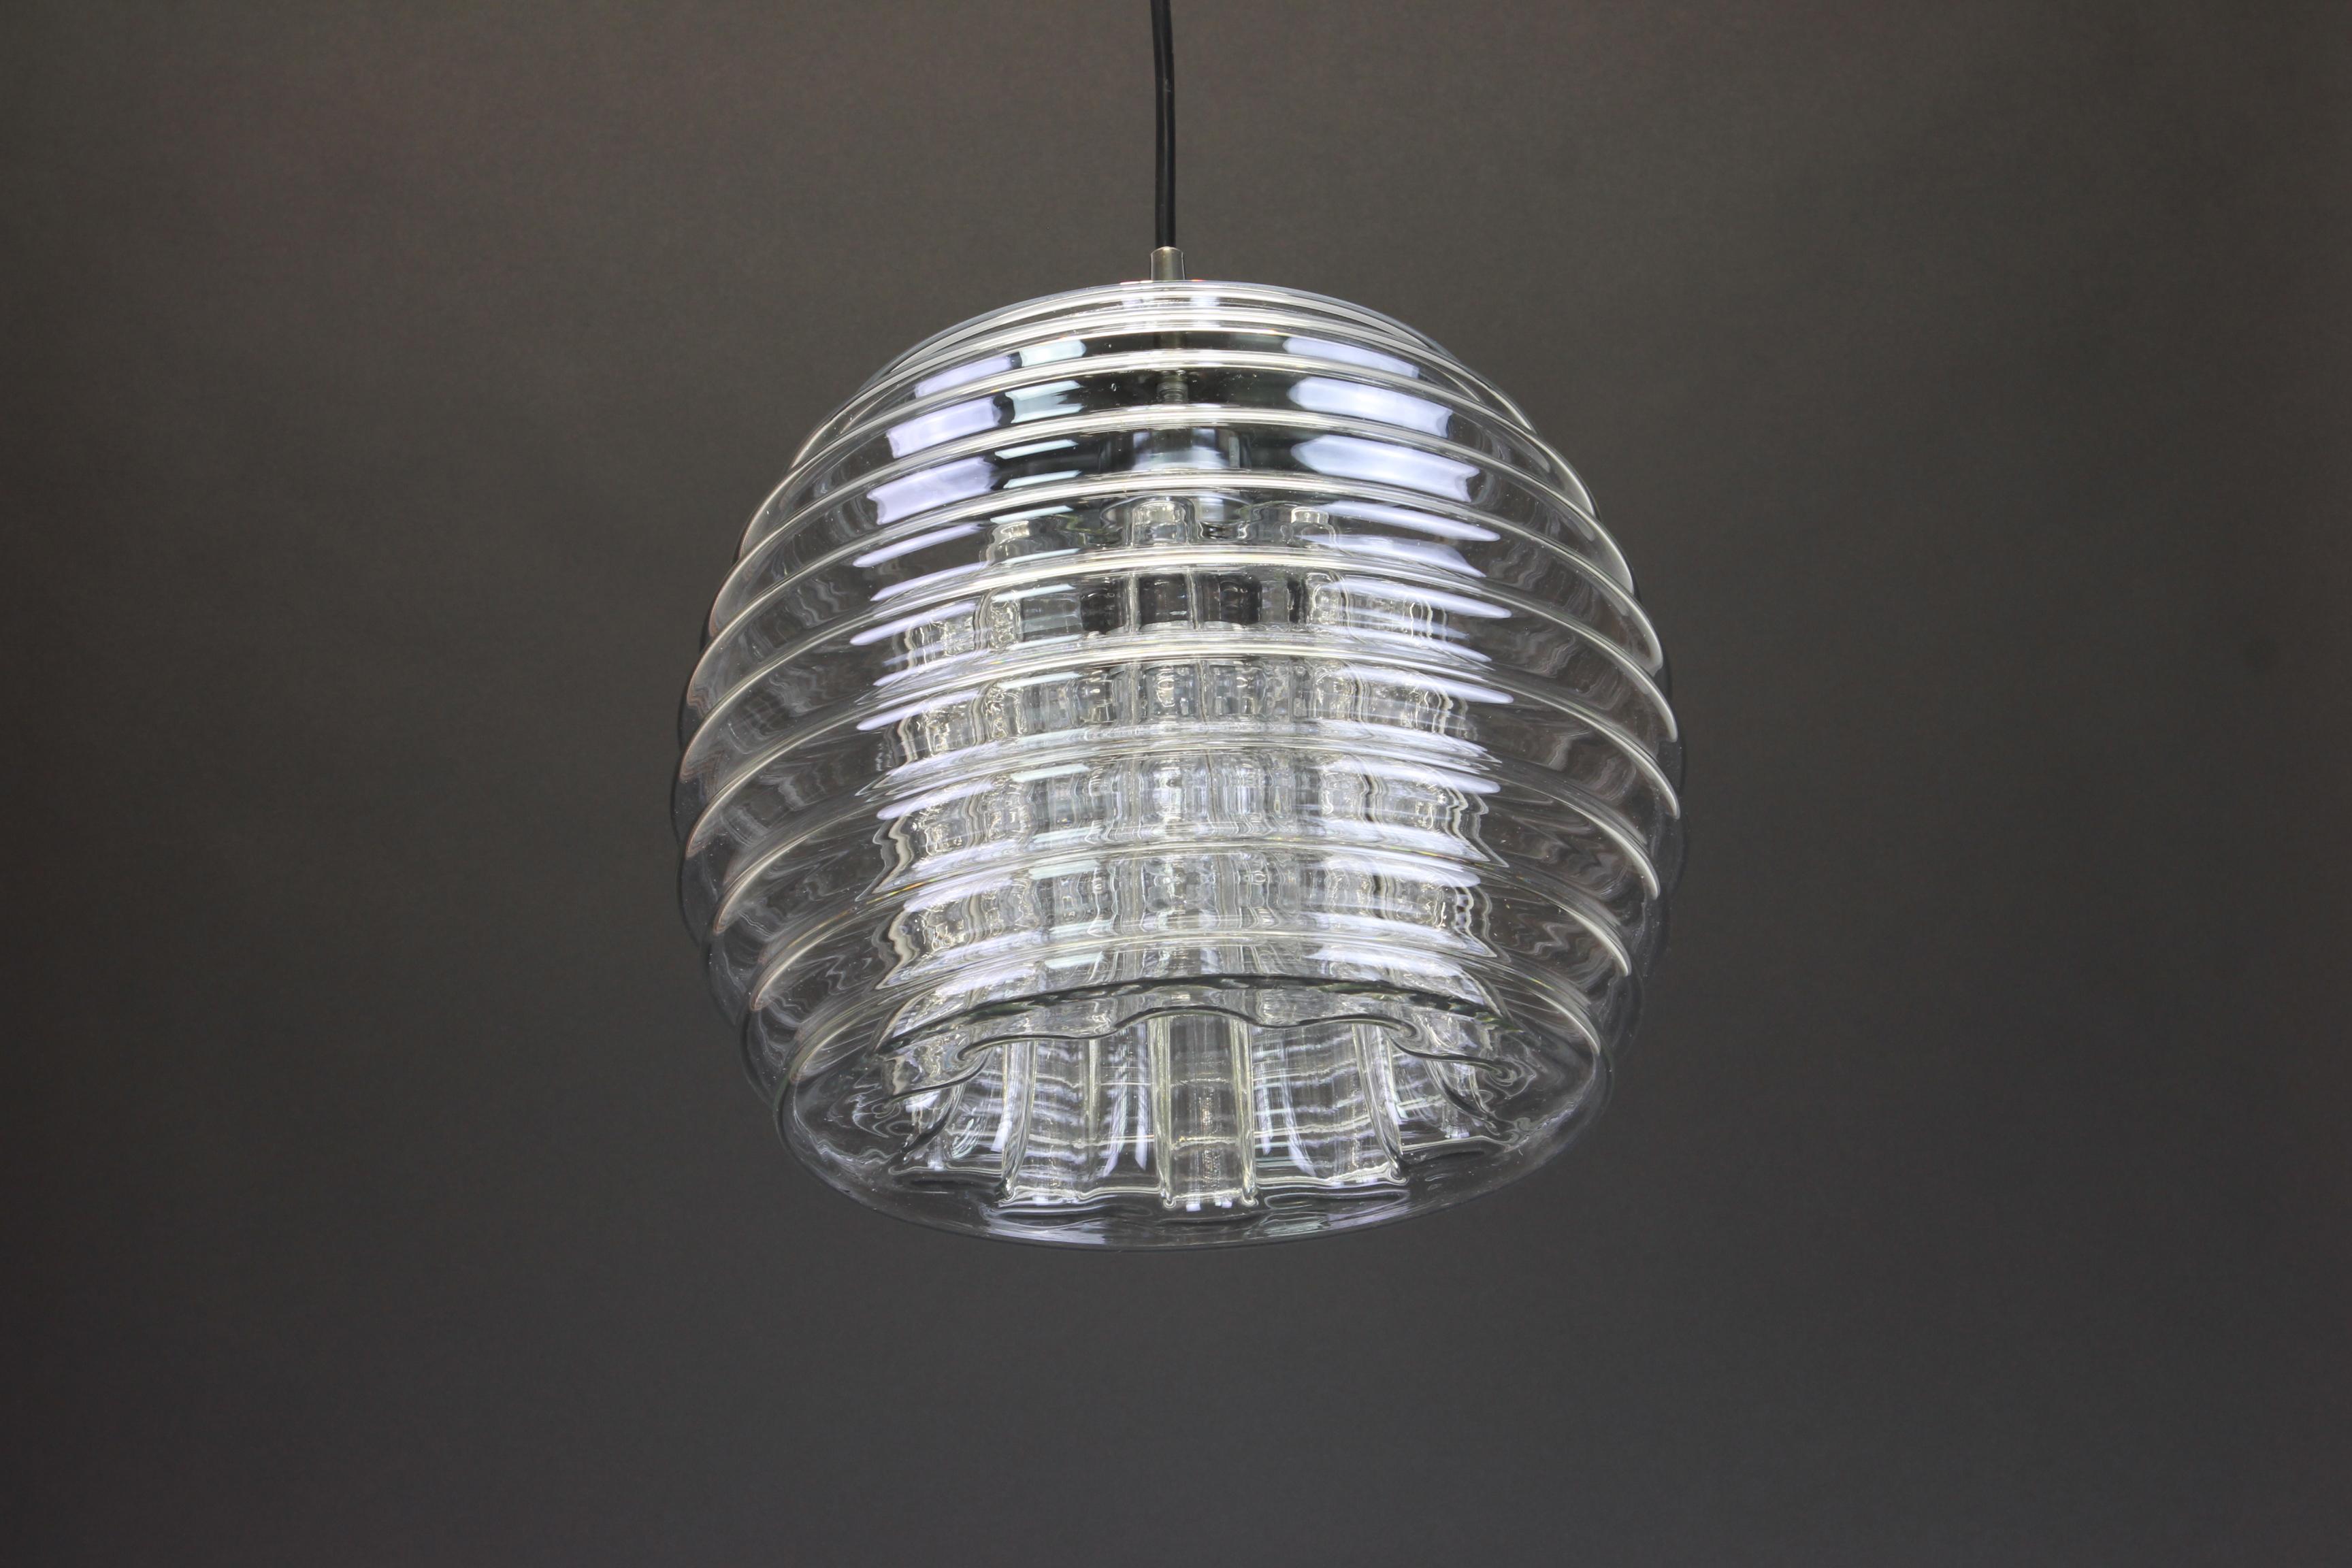 A special round biomorphic glass pendant designed by Koch & Lowy for Peill & Putzler, manufactured in Germany, circa 1970s.

Sockets: One x E27 standard bulb. (100 W max).
Light bulbs are not included. It is possible to install this fixture in